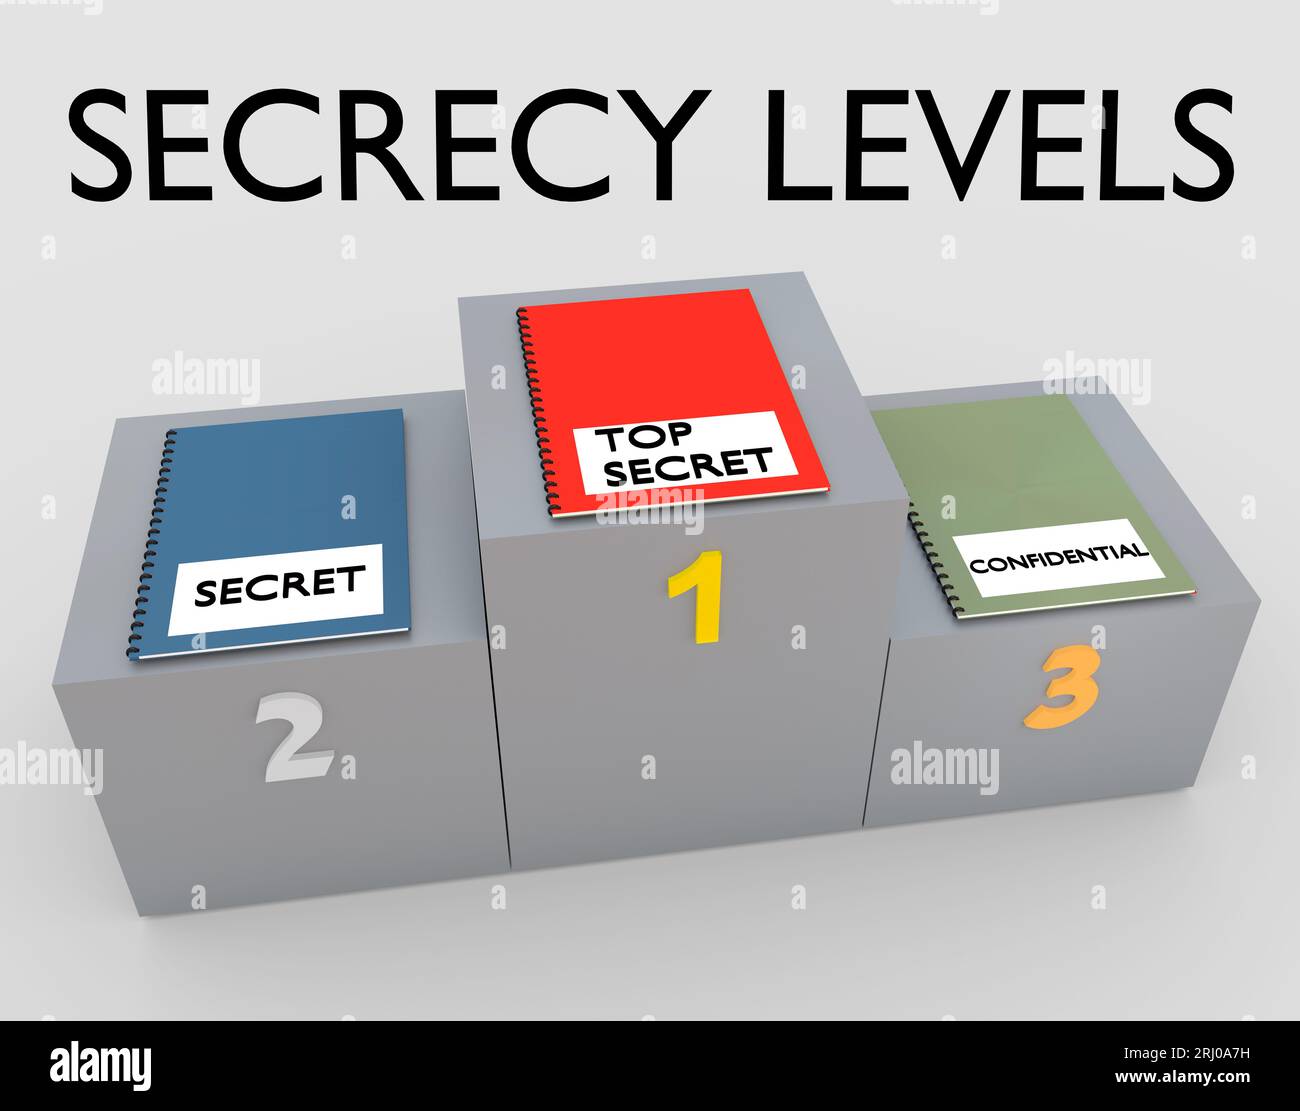 3D illustration of three booklets, titled as TOP SECRET, SECRET and CONFIDENTIAL placed on a podium - titled as SECRECY LEVELS. Stock Photo